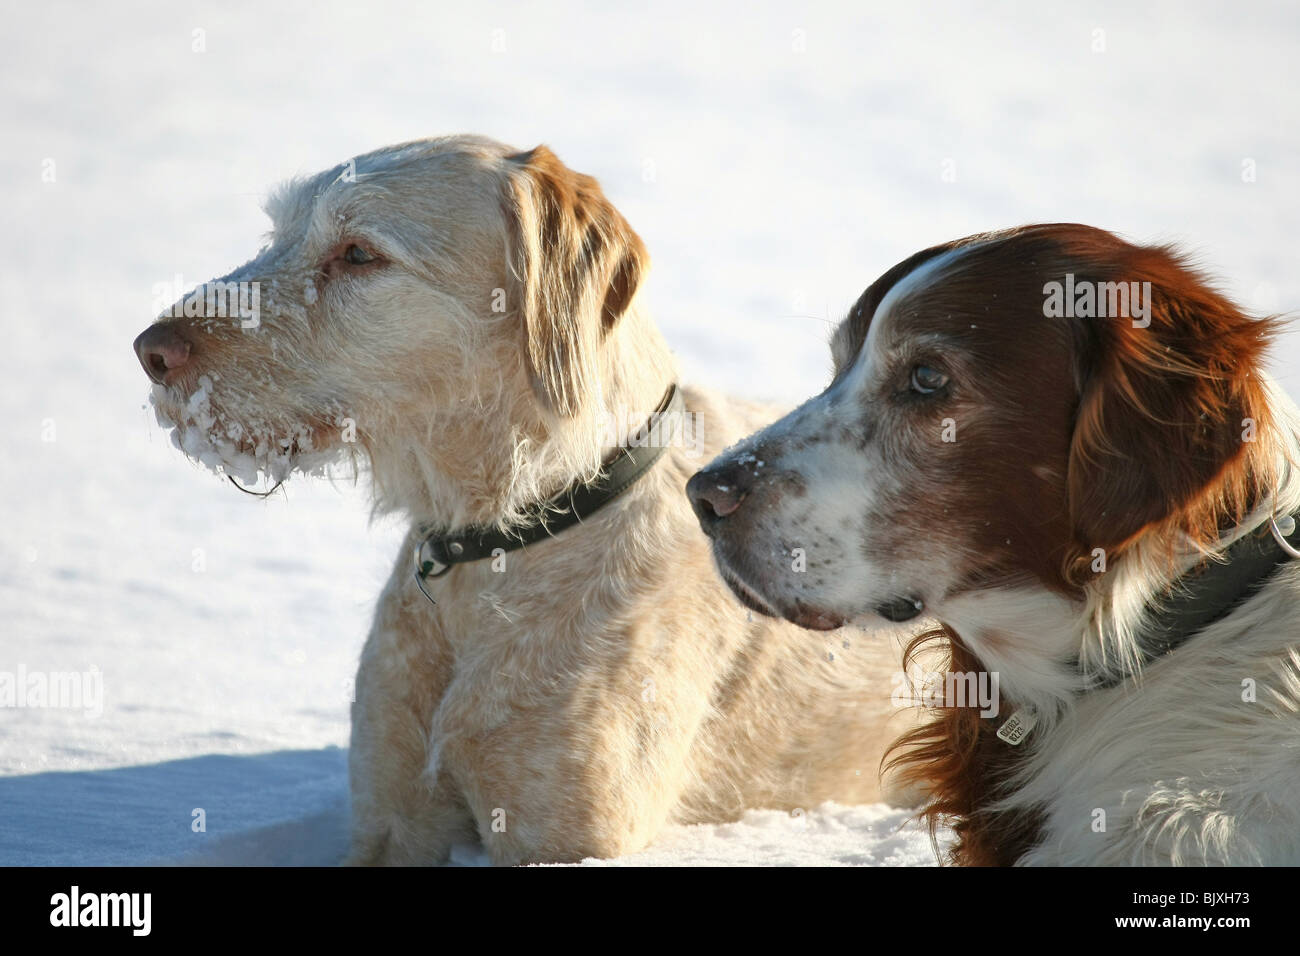 2 dogs in snow Stock Photo